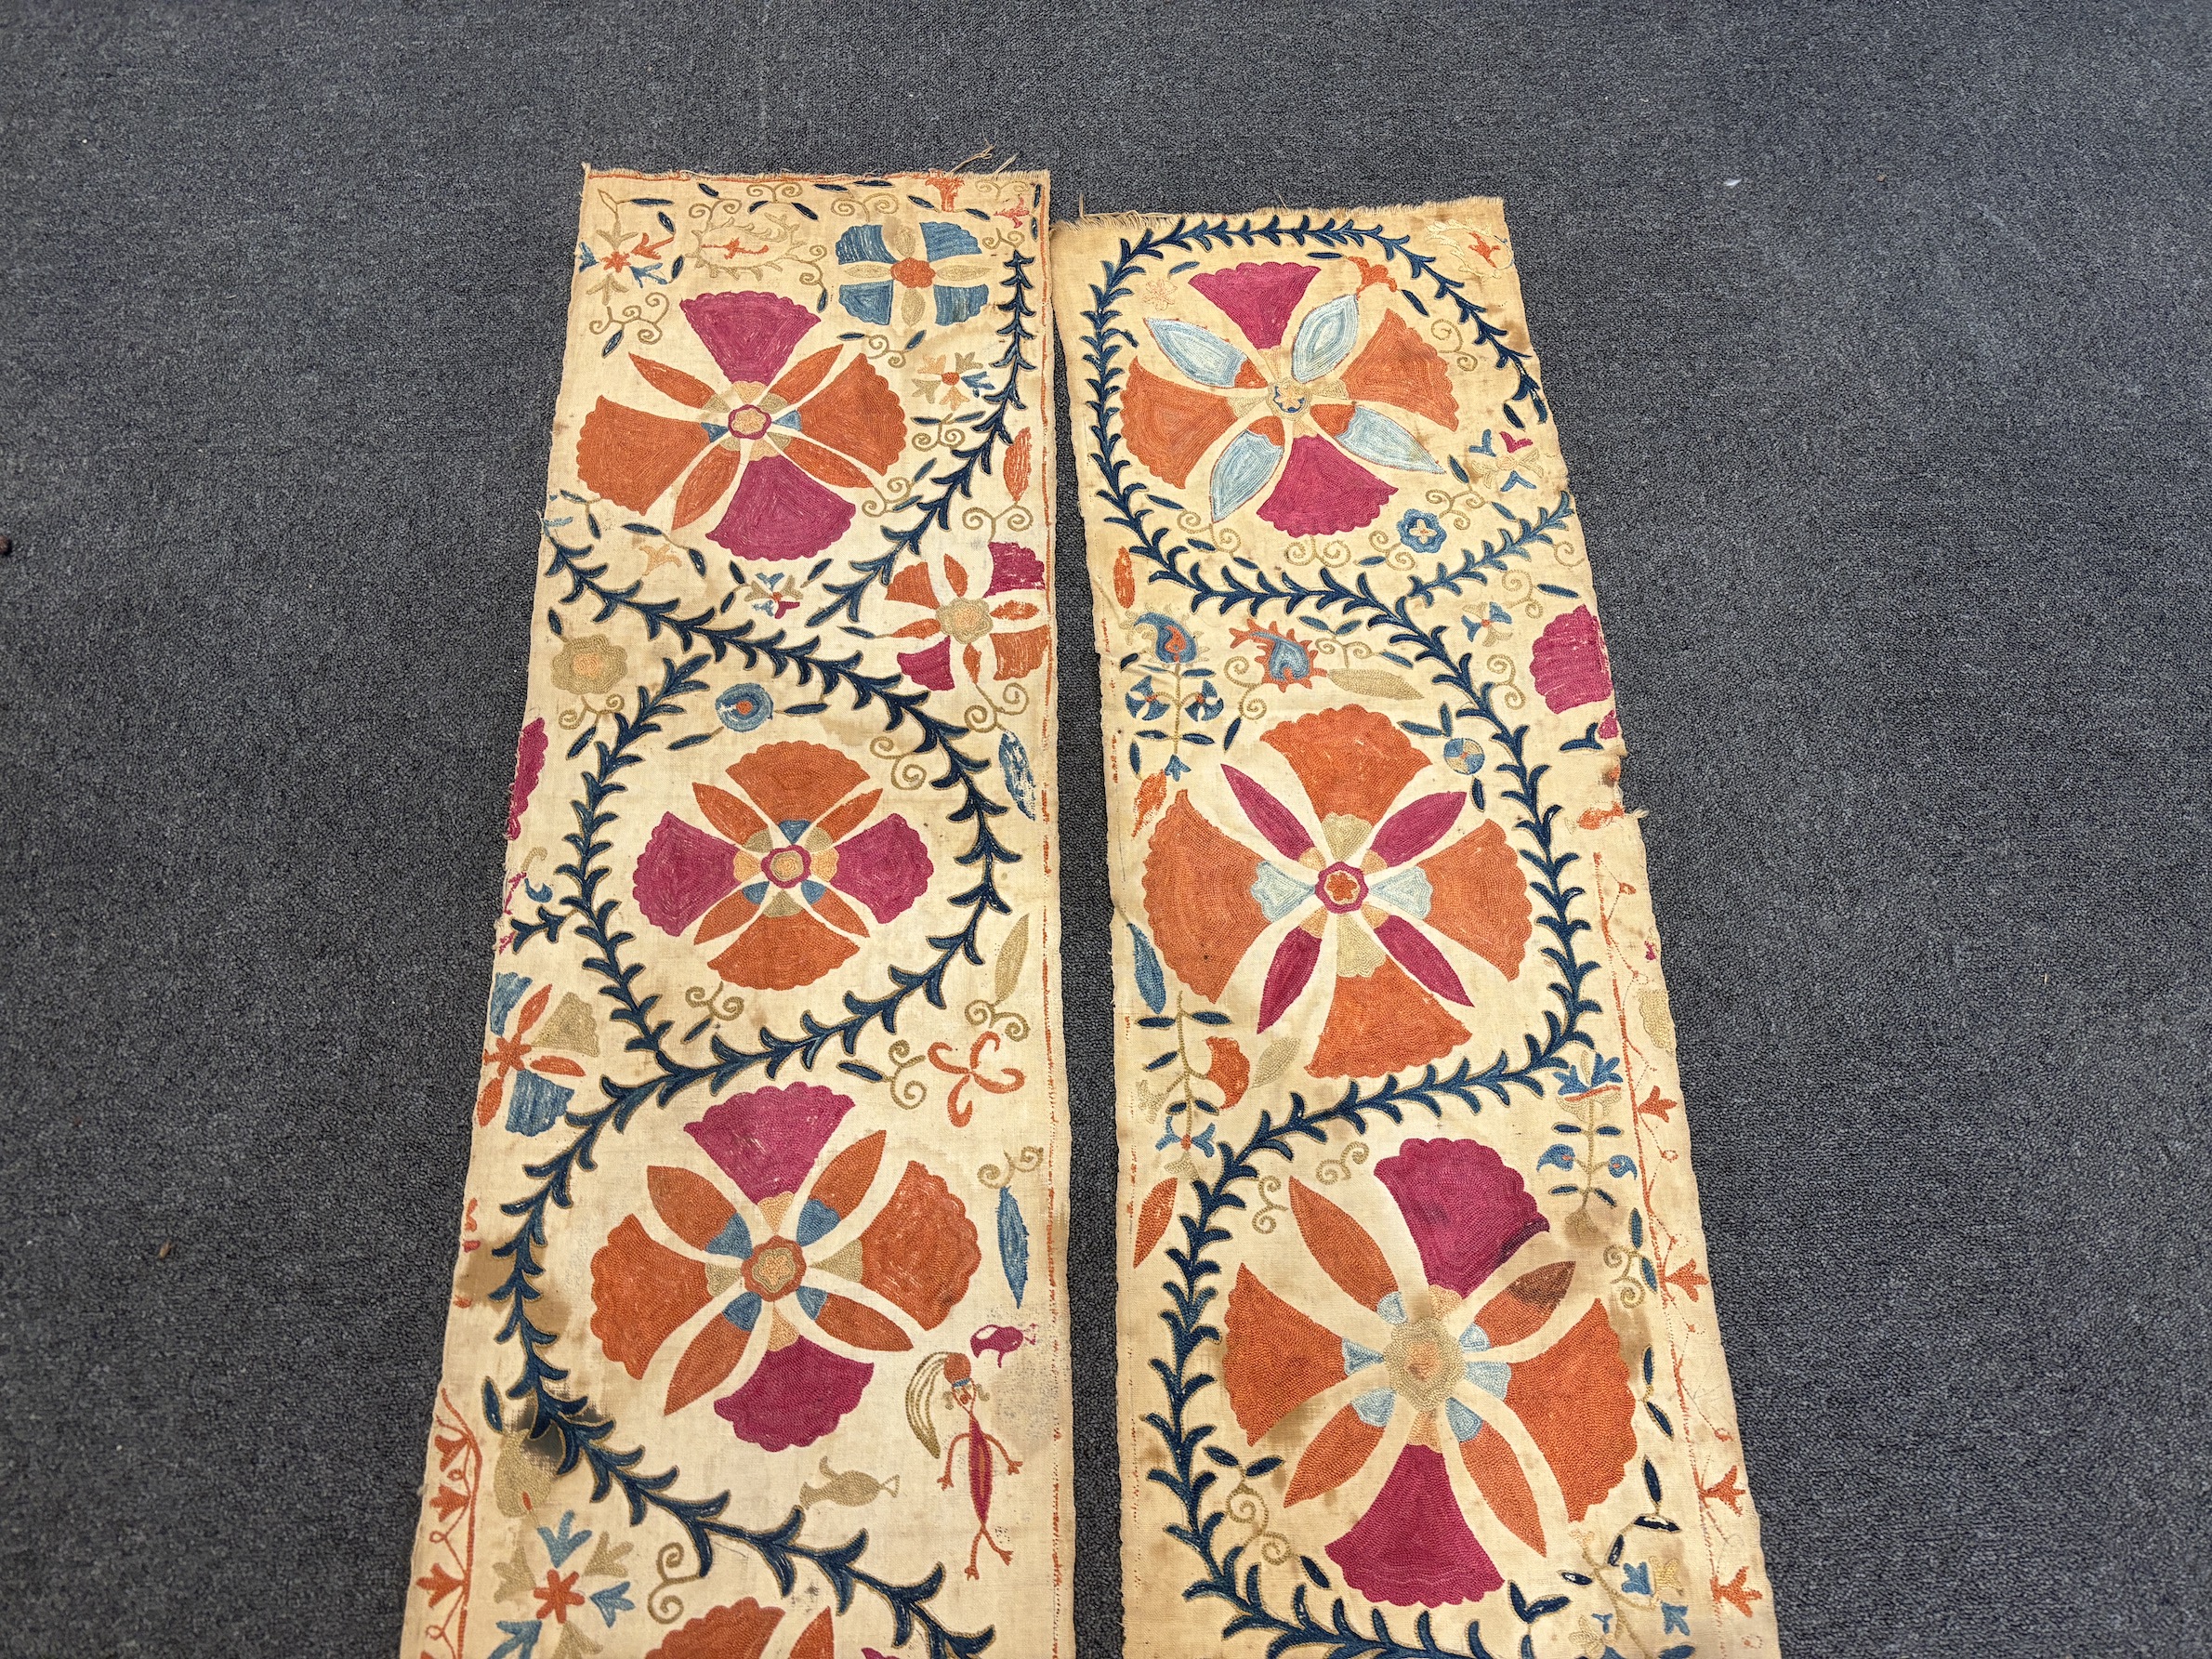 A pair of Uzbekistan long wide panels, both embroidered in mostly red, coral and blue with large symbolic flowers and trailing vines on woven cotton using mostly Burkara couching, longest 250cm long x 38cm wide